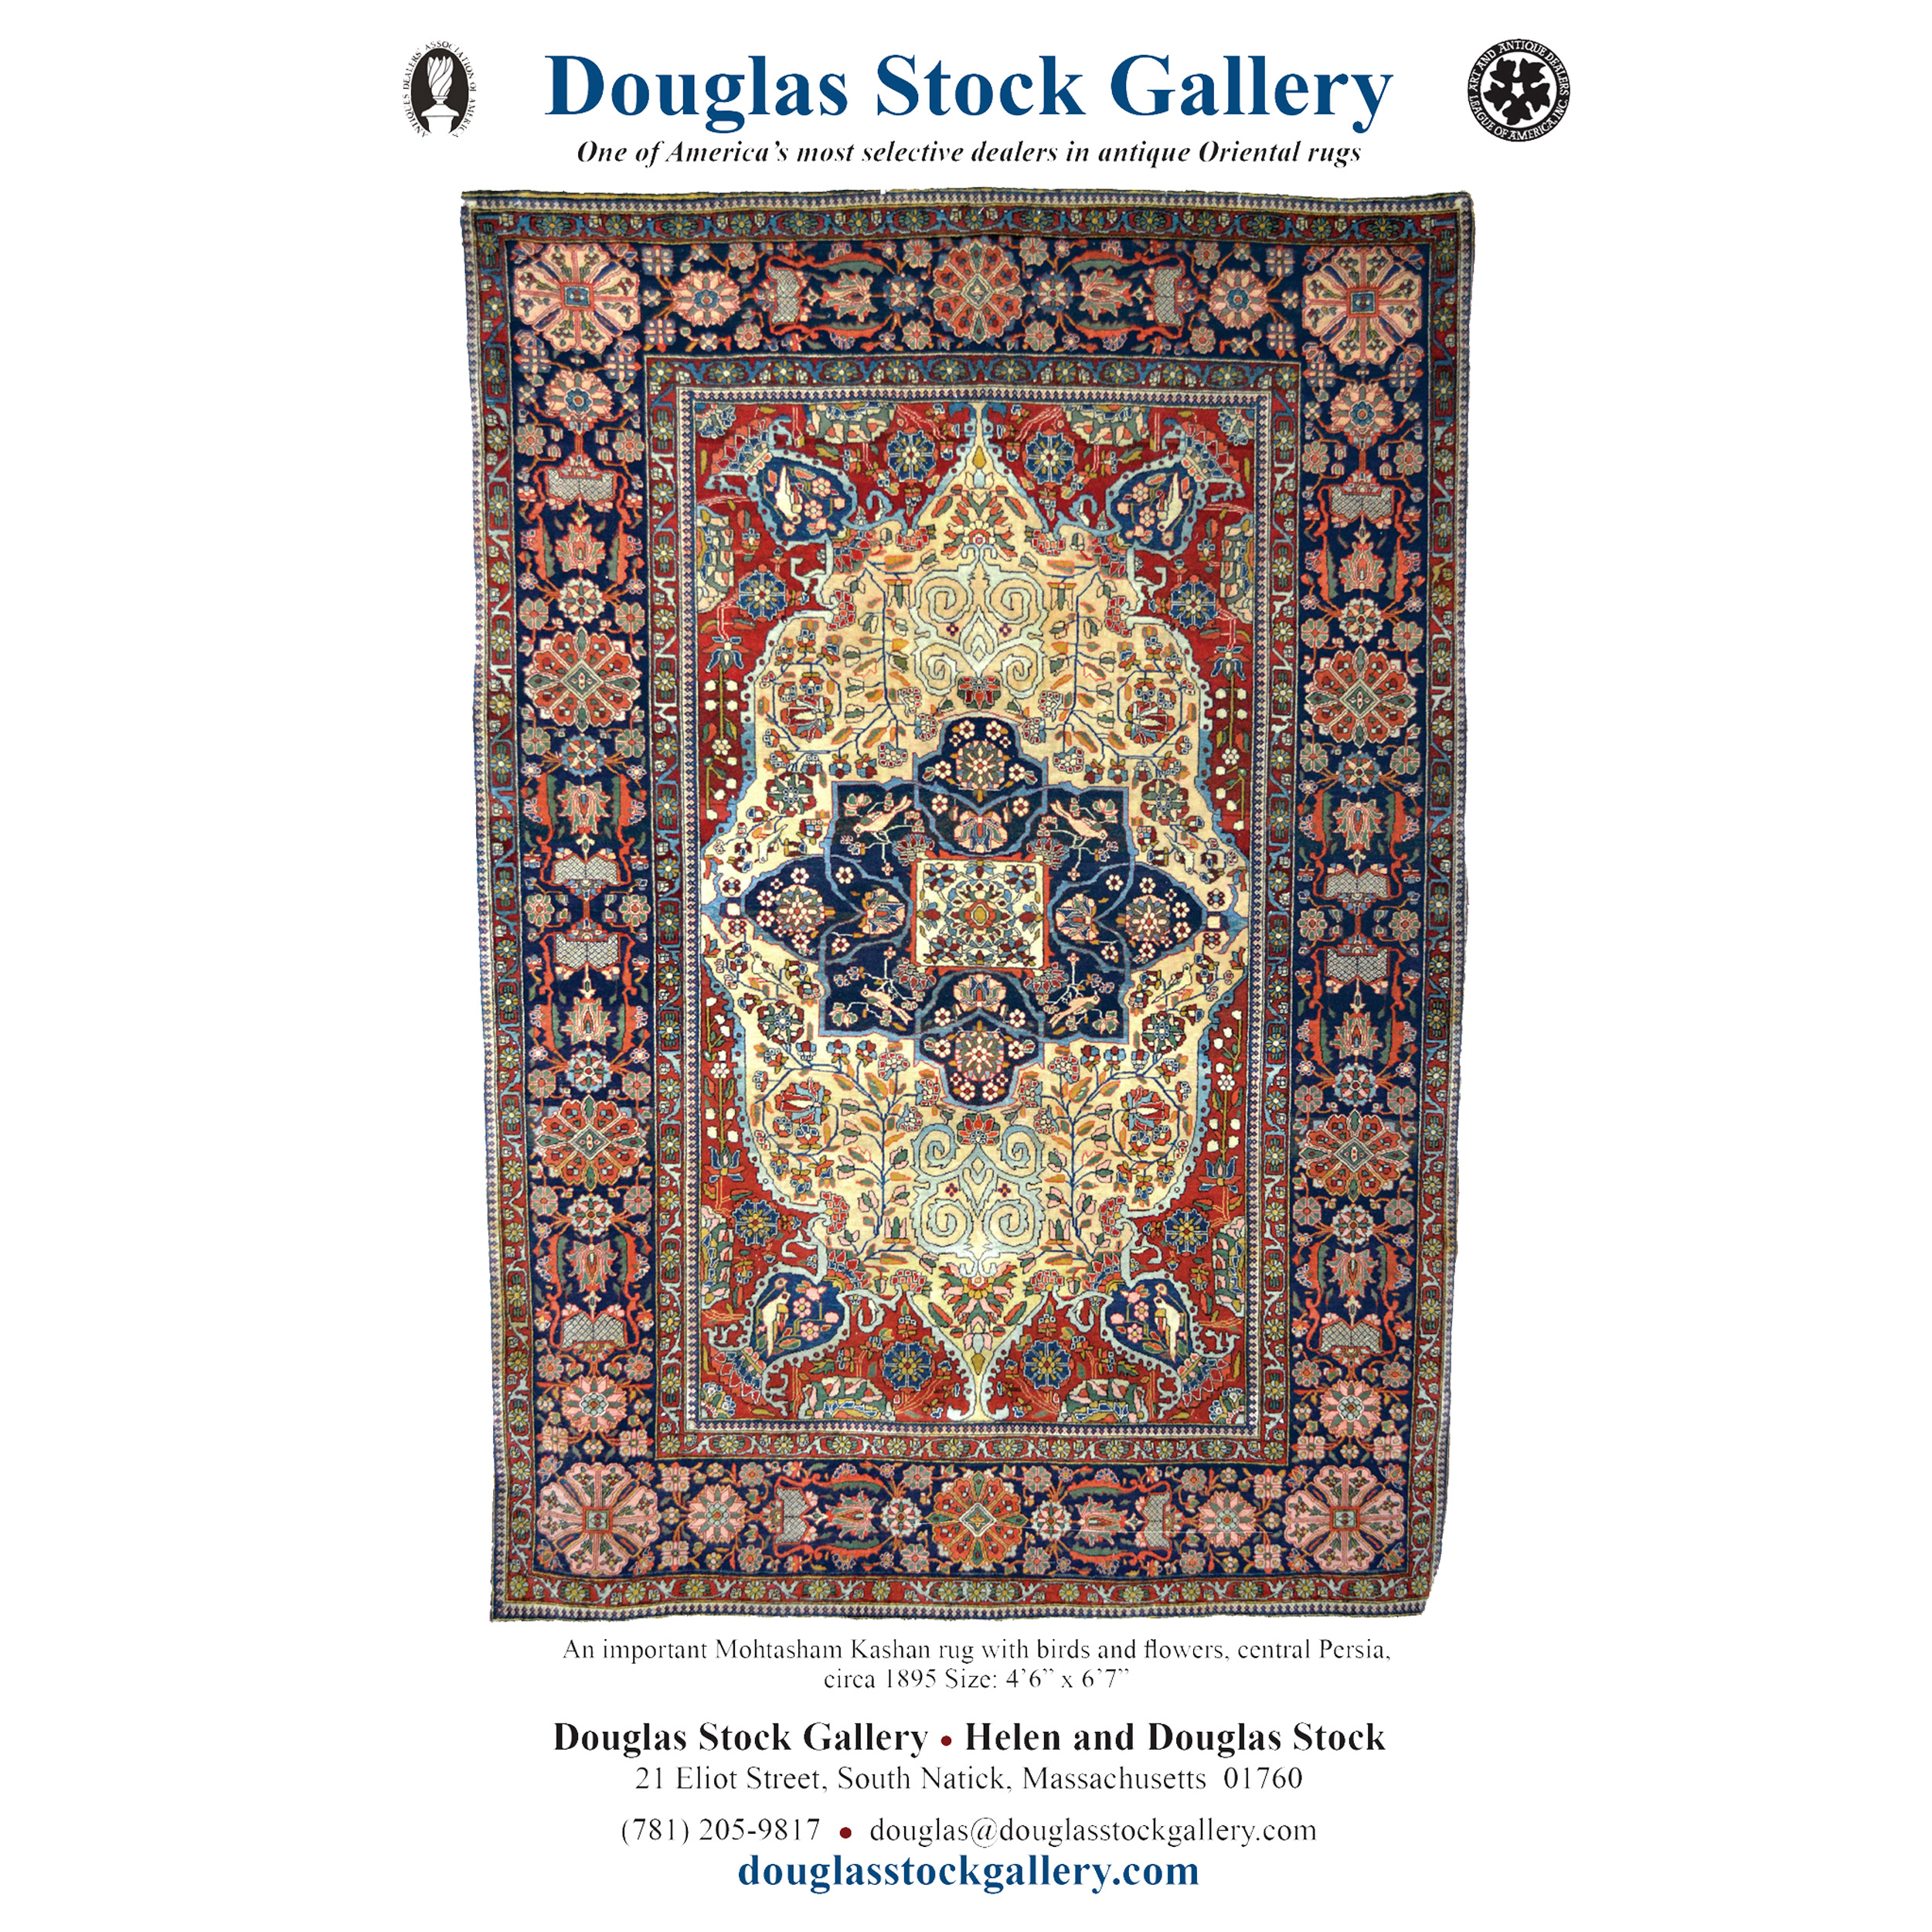 Douglas Stock Gallery advertisement in The Magazine Antiques featuring a late 19th century Persian Mohtasham Kashan rug with a navy blue medallion on an ivory field. Brick red corner spandrels with vases and birds and a navy blue border with large flowerheads frame the field. Douglas Stock Gallery, antique rugs Boston, Brookline, Newton, Weston, Wellesley, Natick,MA area